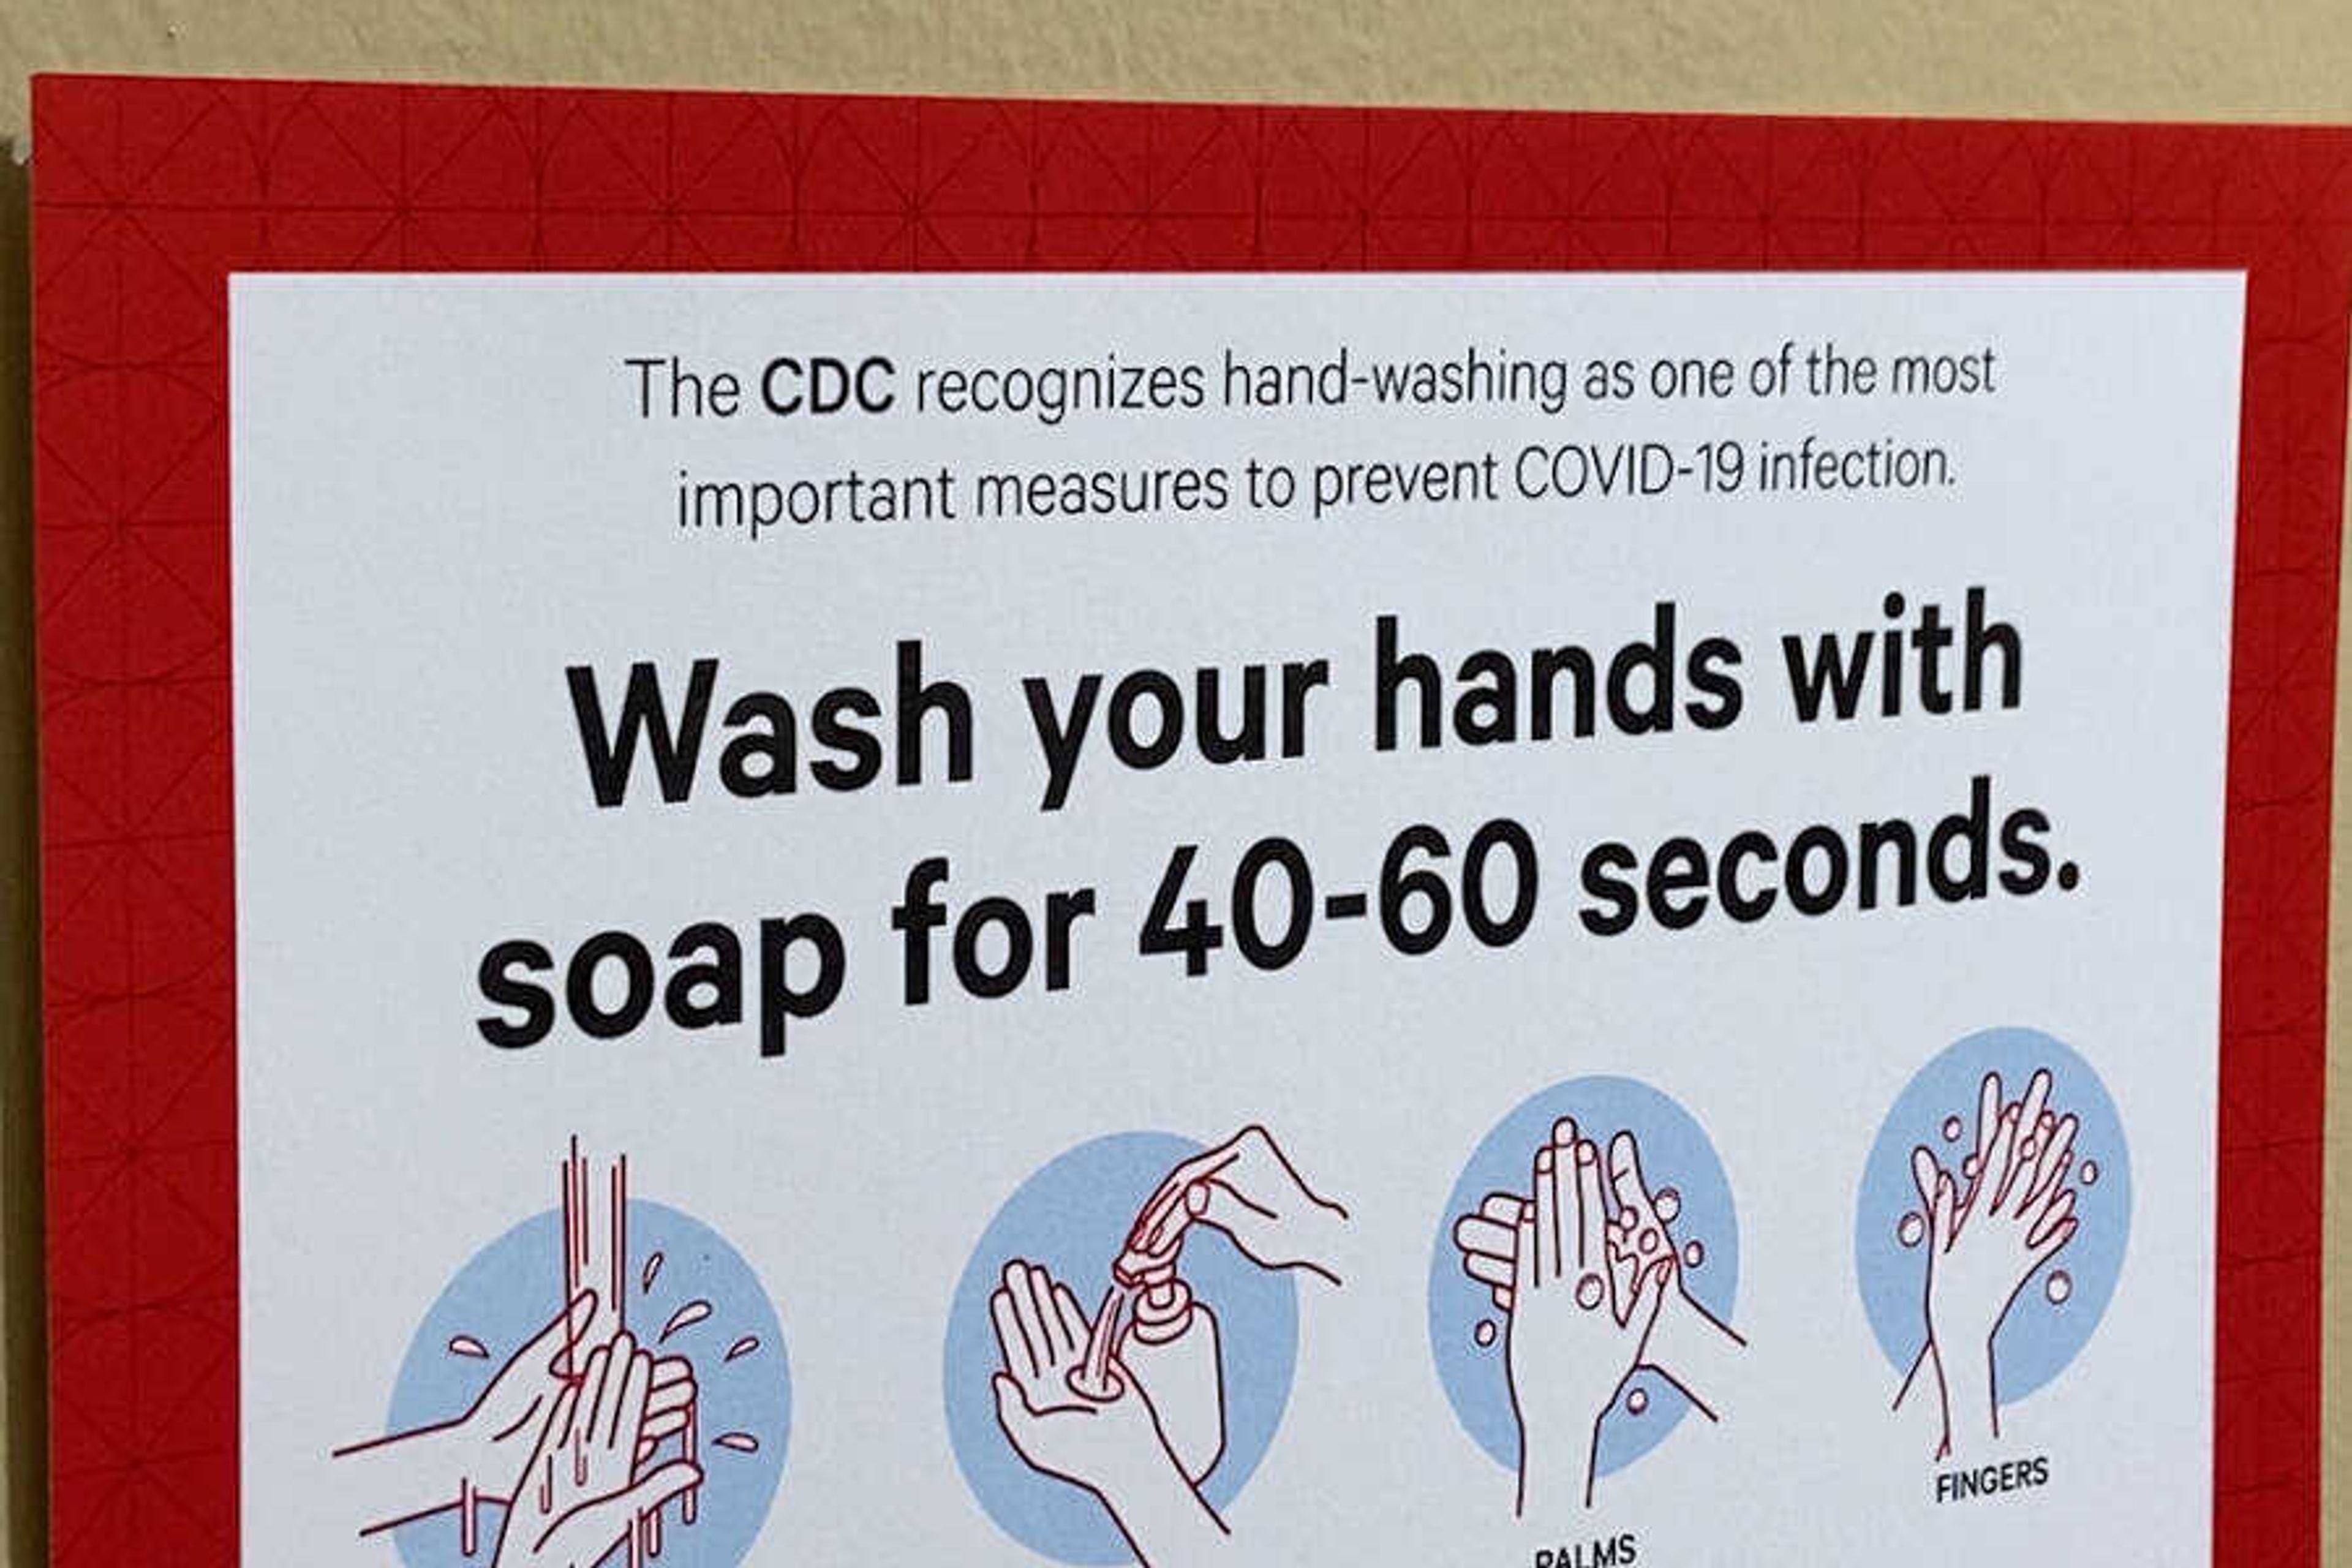 Residence Life has placed posters across their dorms reminding students of the proper way to wash their hands, to reduce the passing of germs to others.